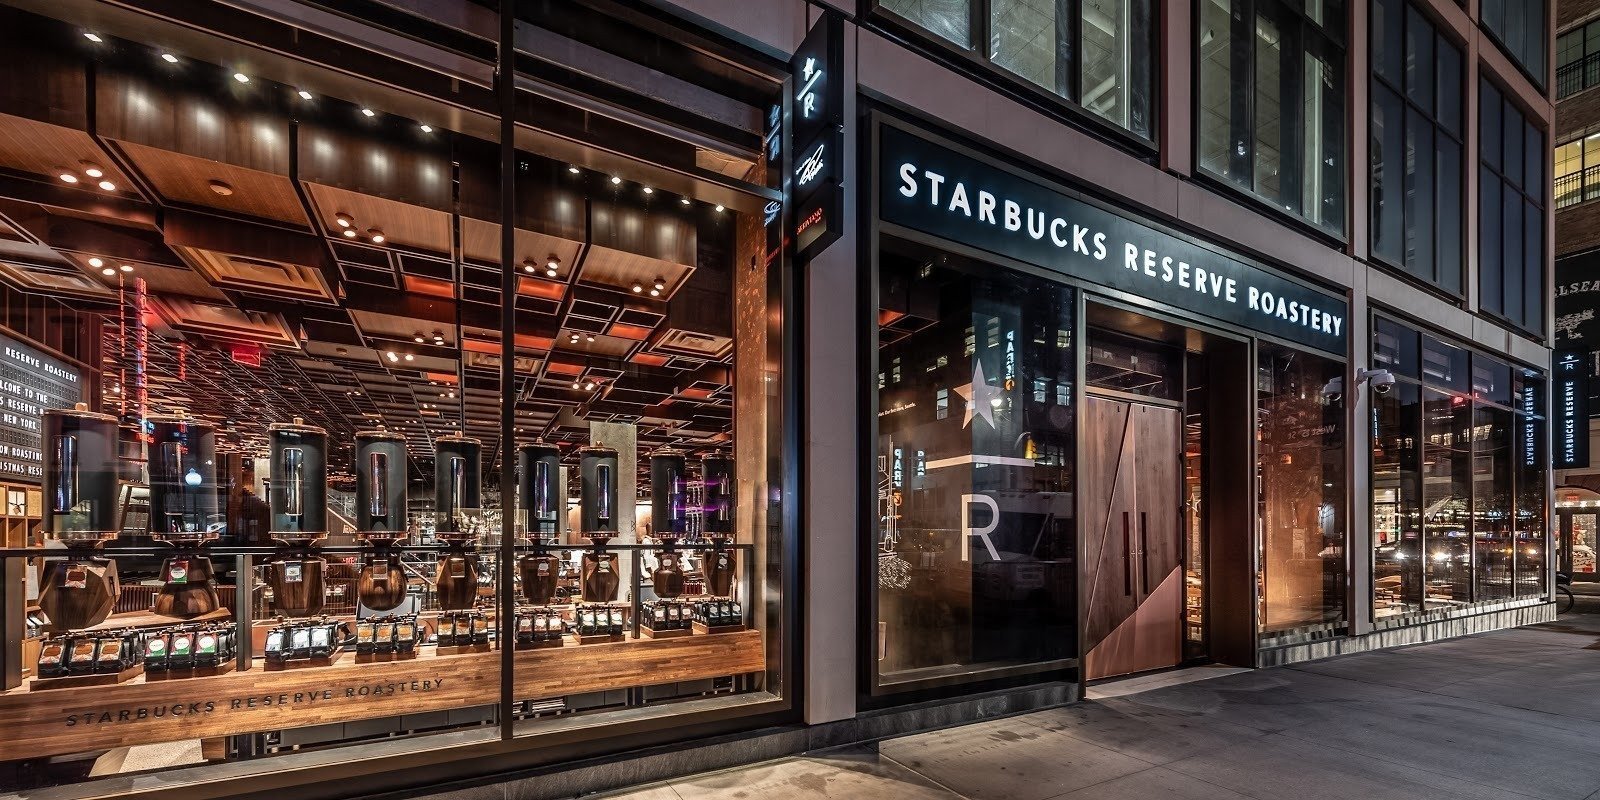 <span class="translation_missing" title="translation missing: en.meta.location_title, location_name: Starbucks Reserve Roastery New York, city: New York">Location Title</span>